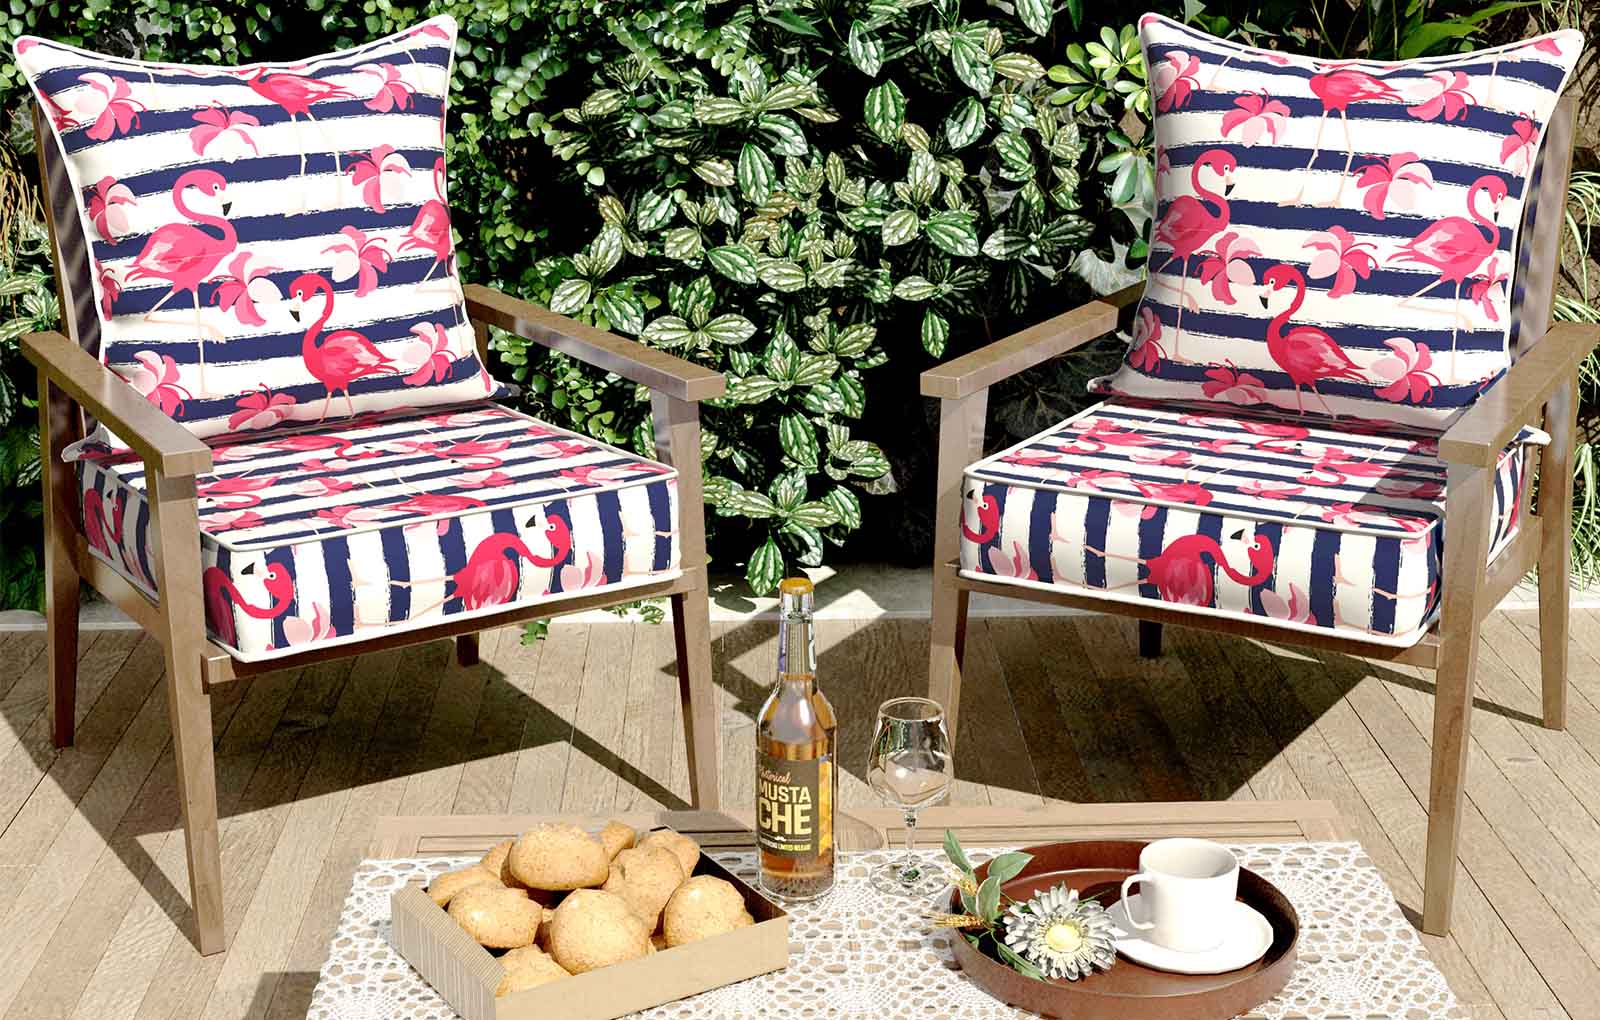 Why choose flamingo outdoor cushions to your patio?